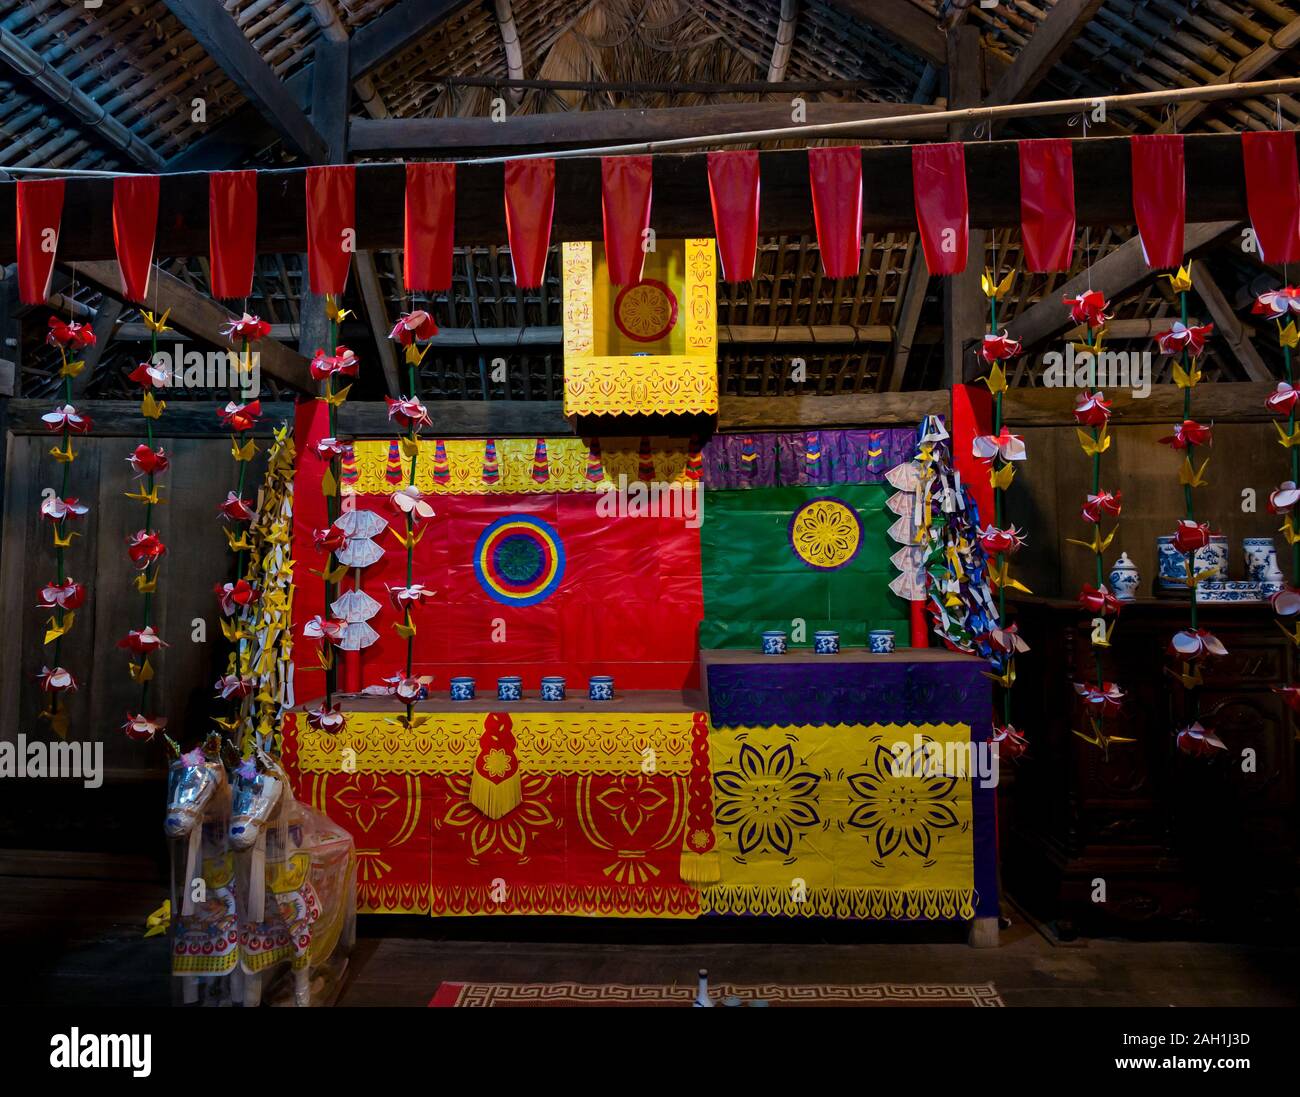 Altar in Thai Hai ethnic village traditional way of life, Thai Nguyen province, Northern Vietnam, Asia Stock Photo